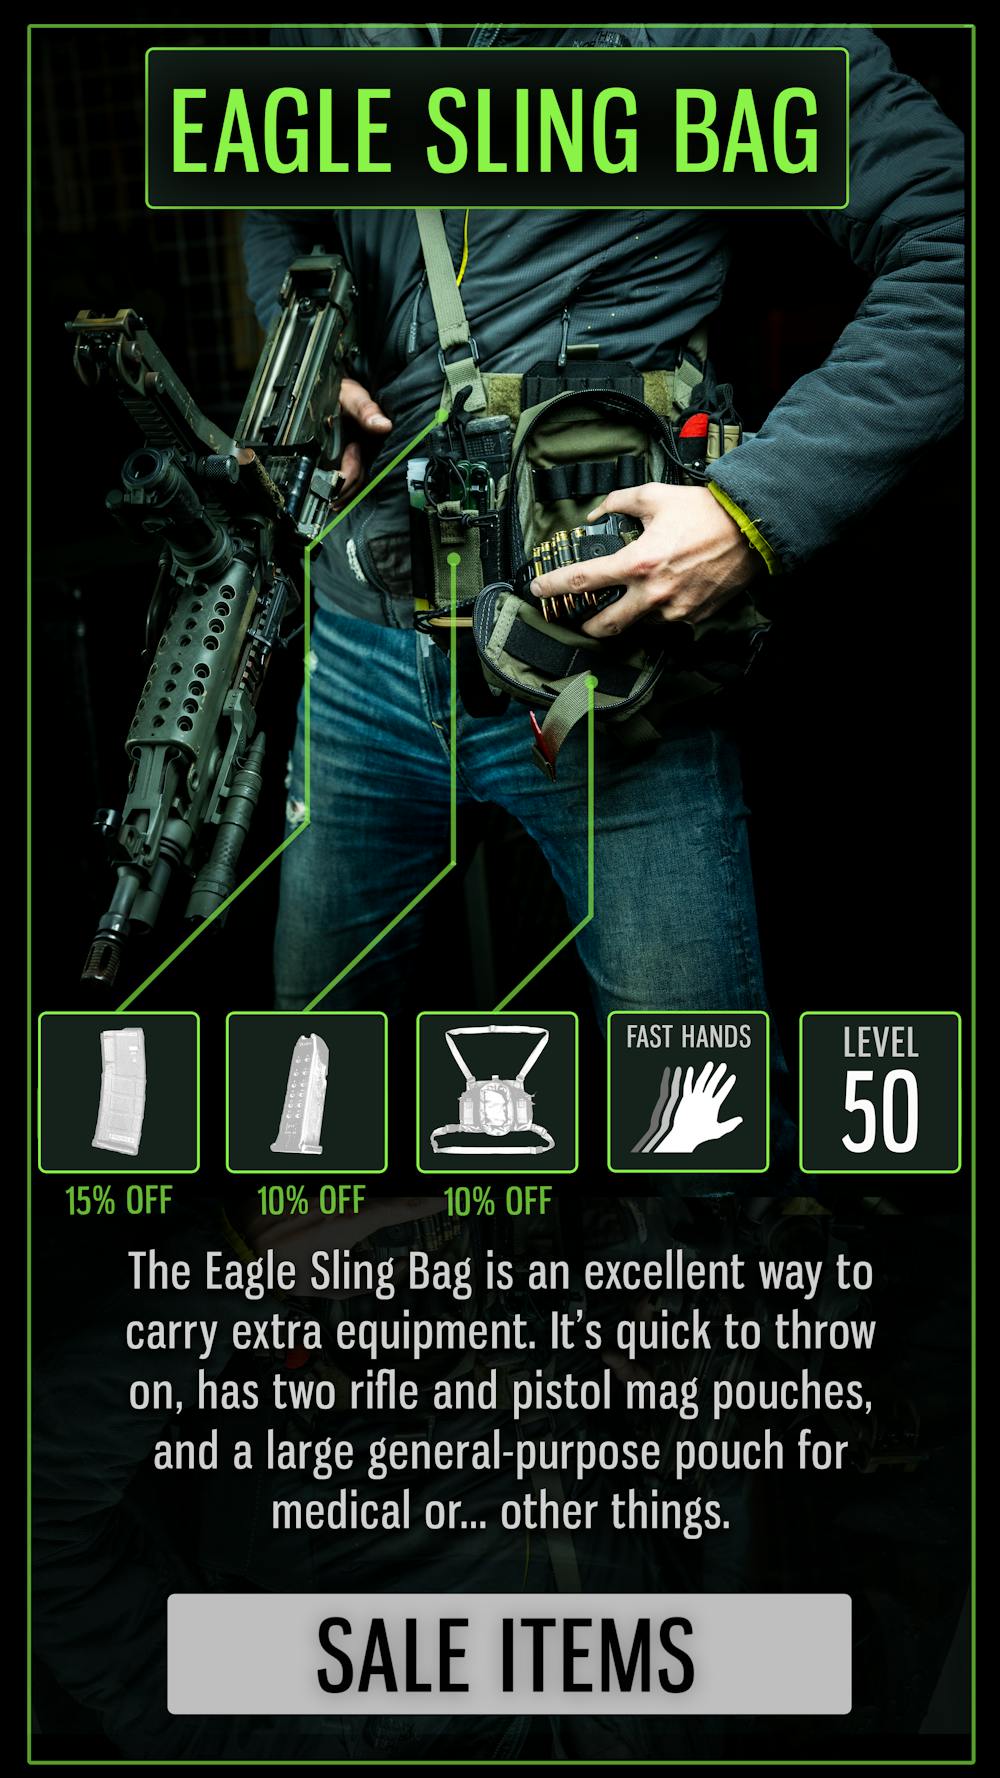 EAGLE SLING BAG

The Eagle Sling Bag is an excellent way to carry extra equipment. It's quick to throw on, has two rifle and pistol mag pouches, and a large general-purpose pouch for medical or... other things.

SALE ITEMS